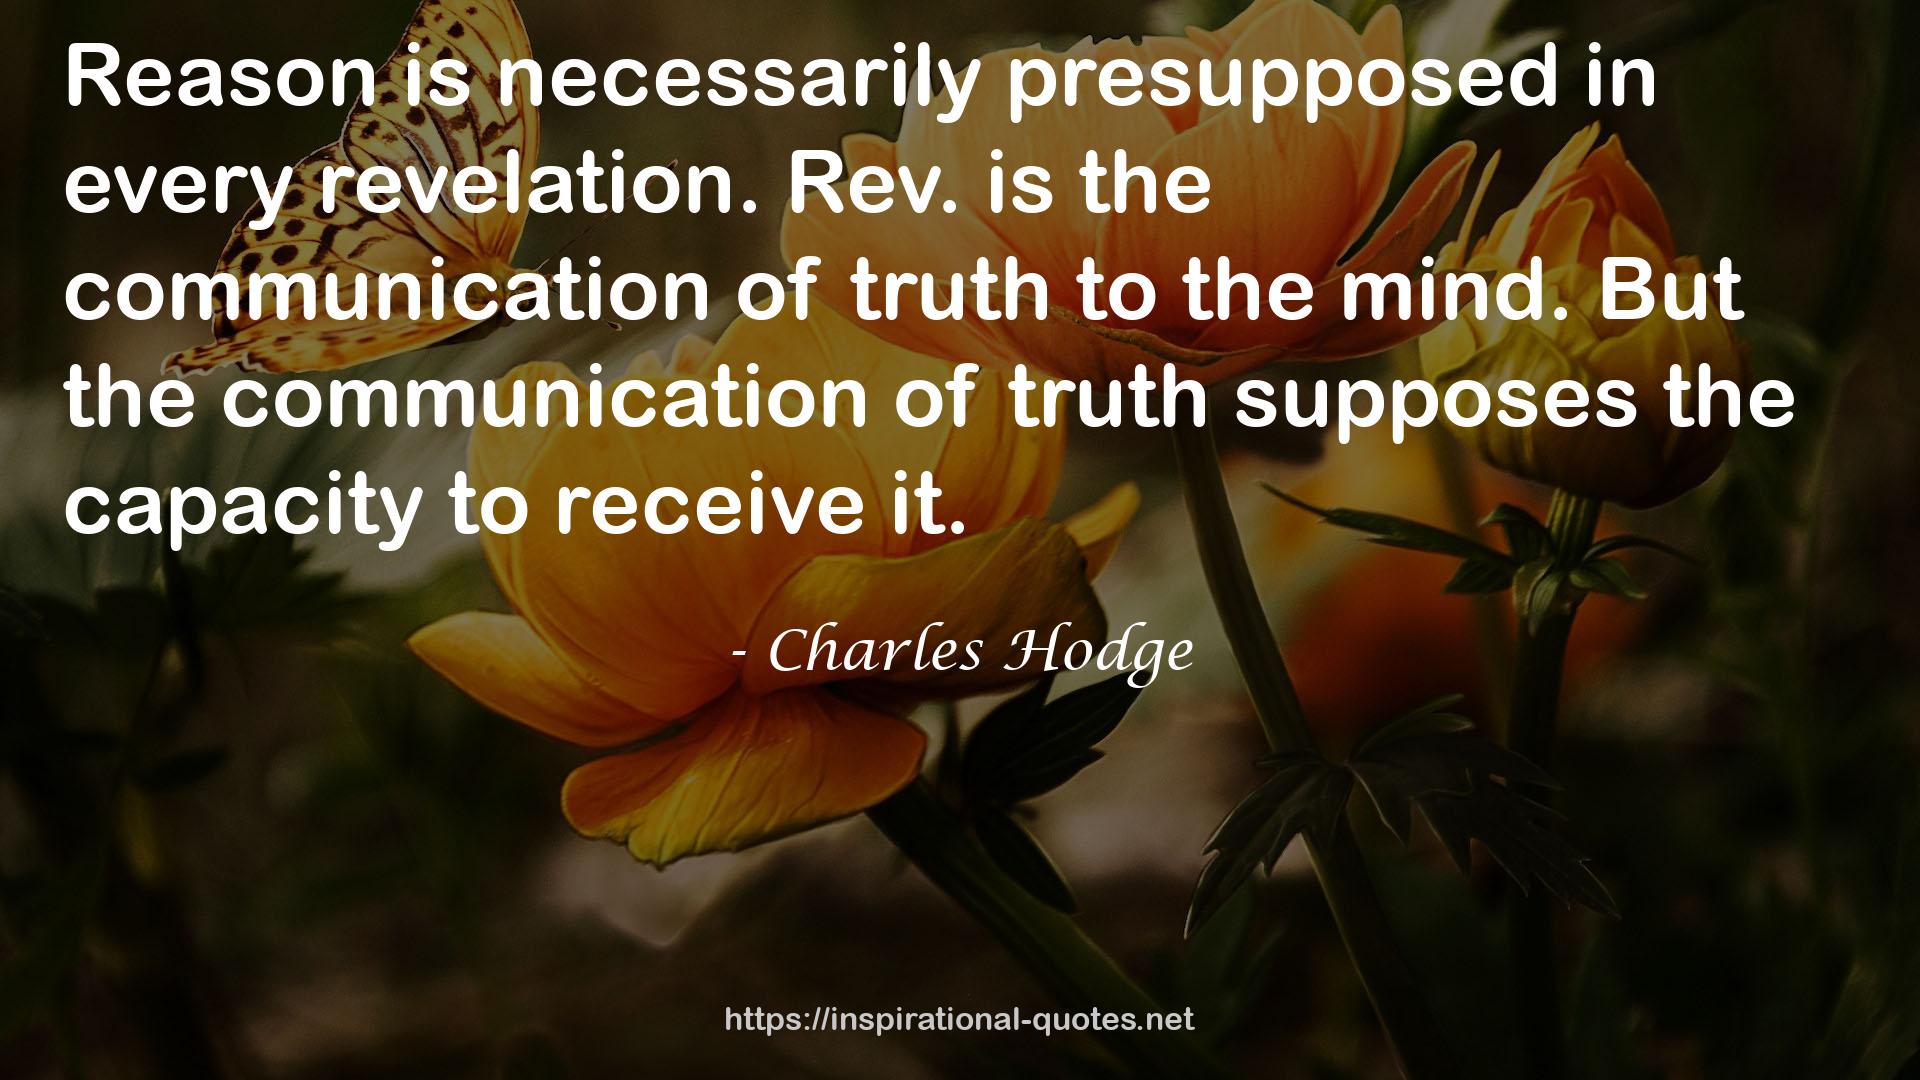 Charles Hodge QUOTES